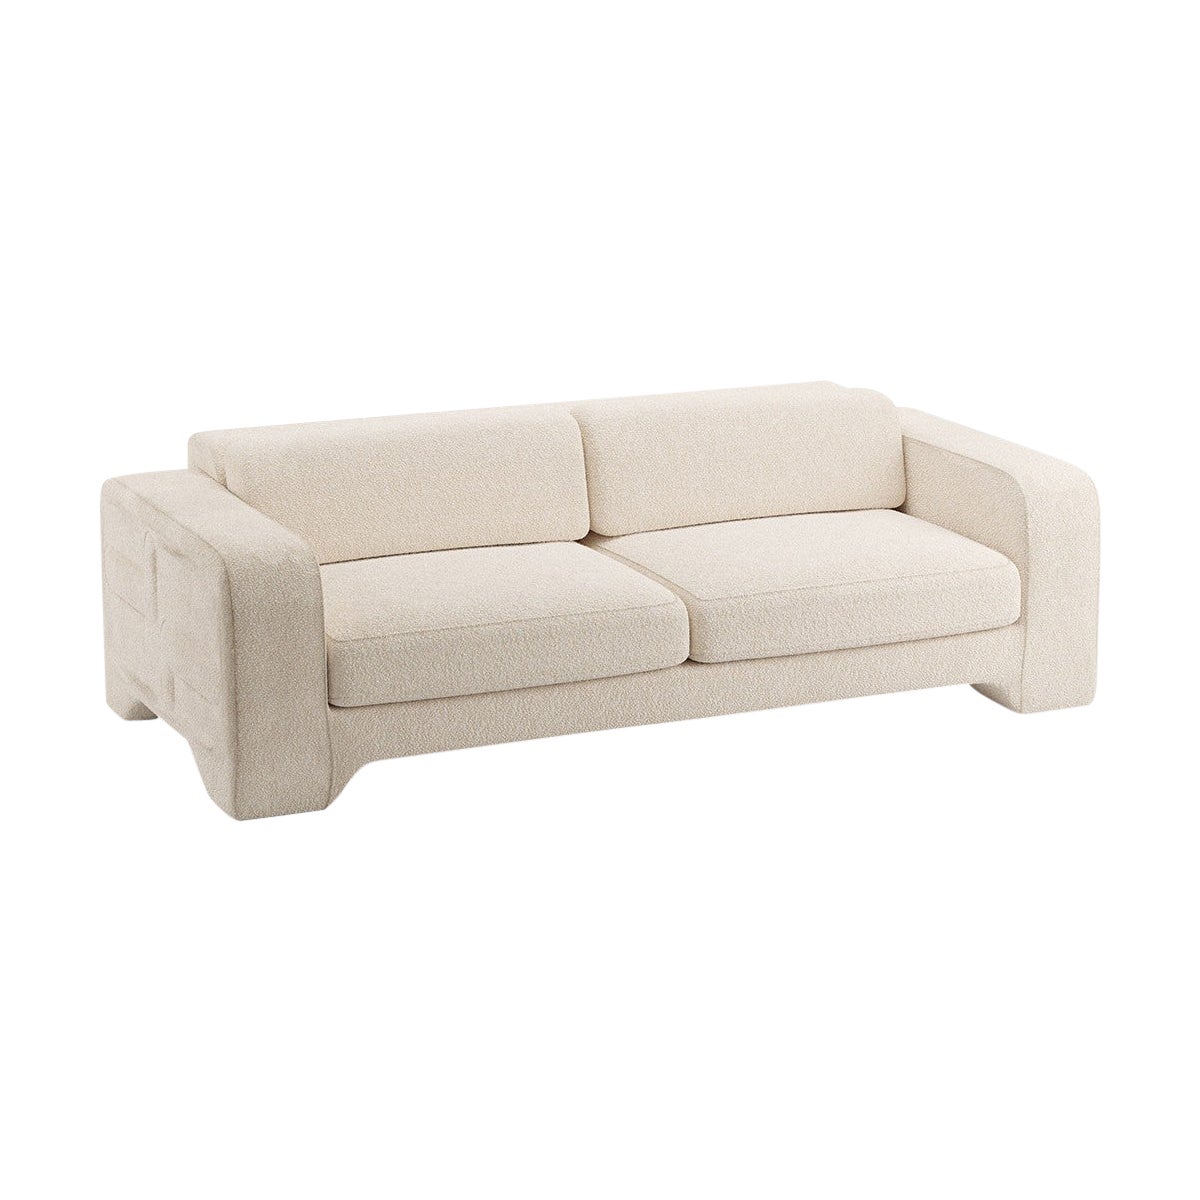 Popus Editions Giovanna 2.5 Seater Sofa in Natural Athena Loop Yarn Upholstery For Sale